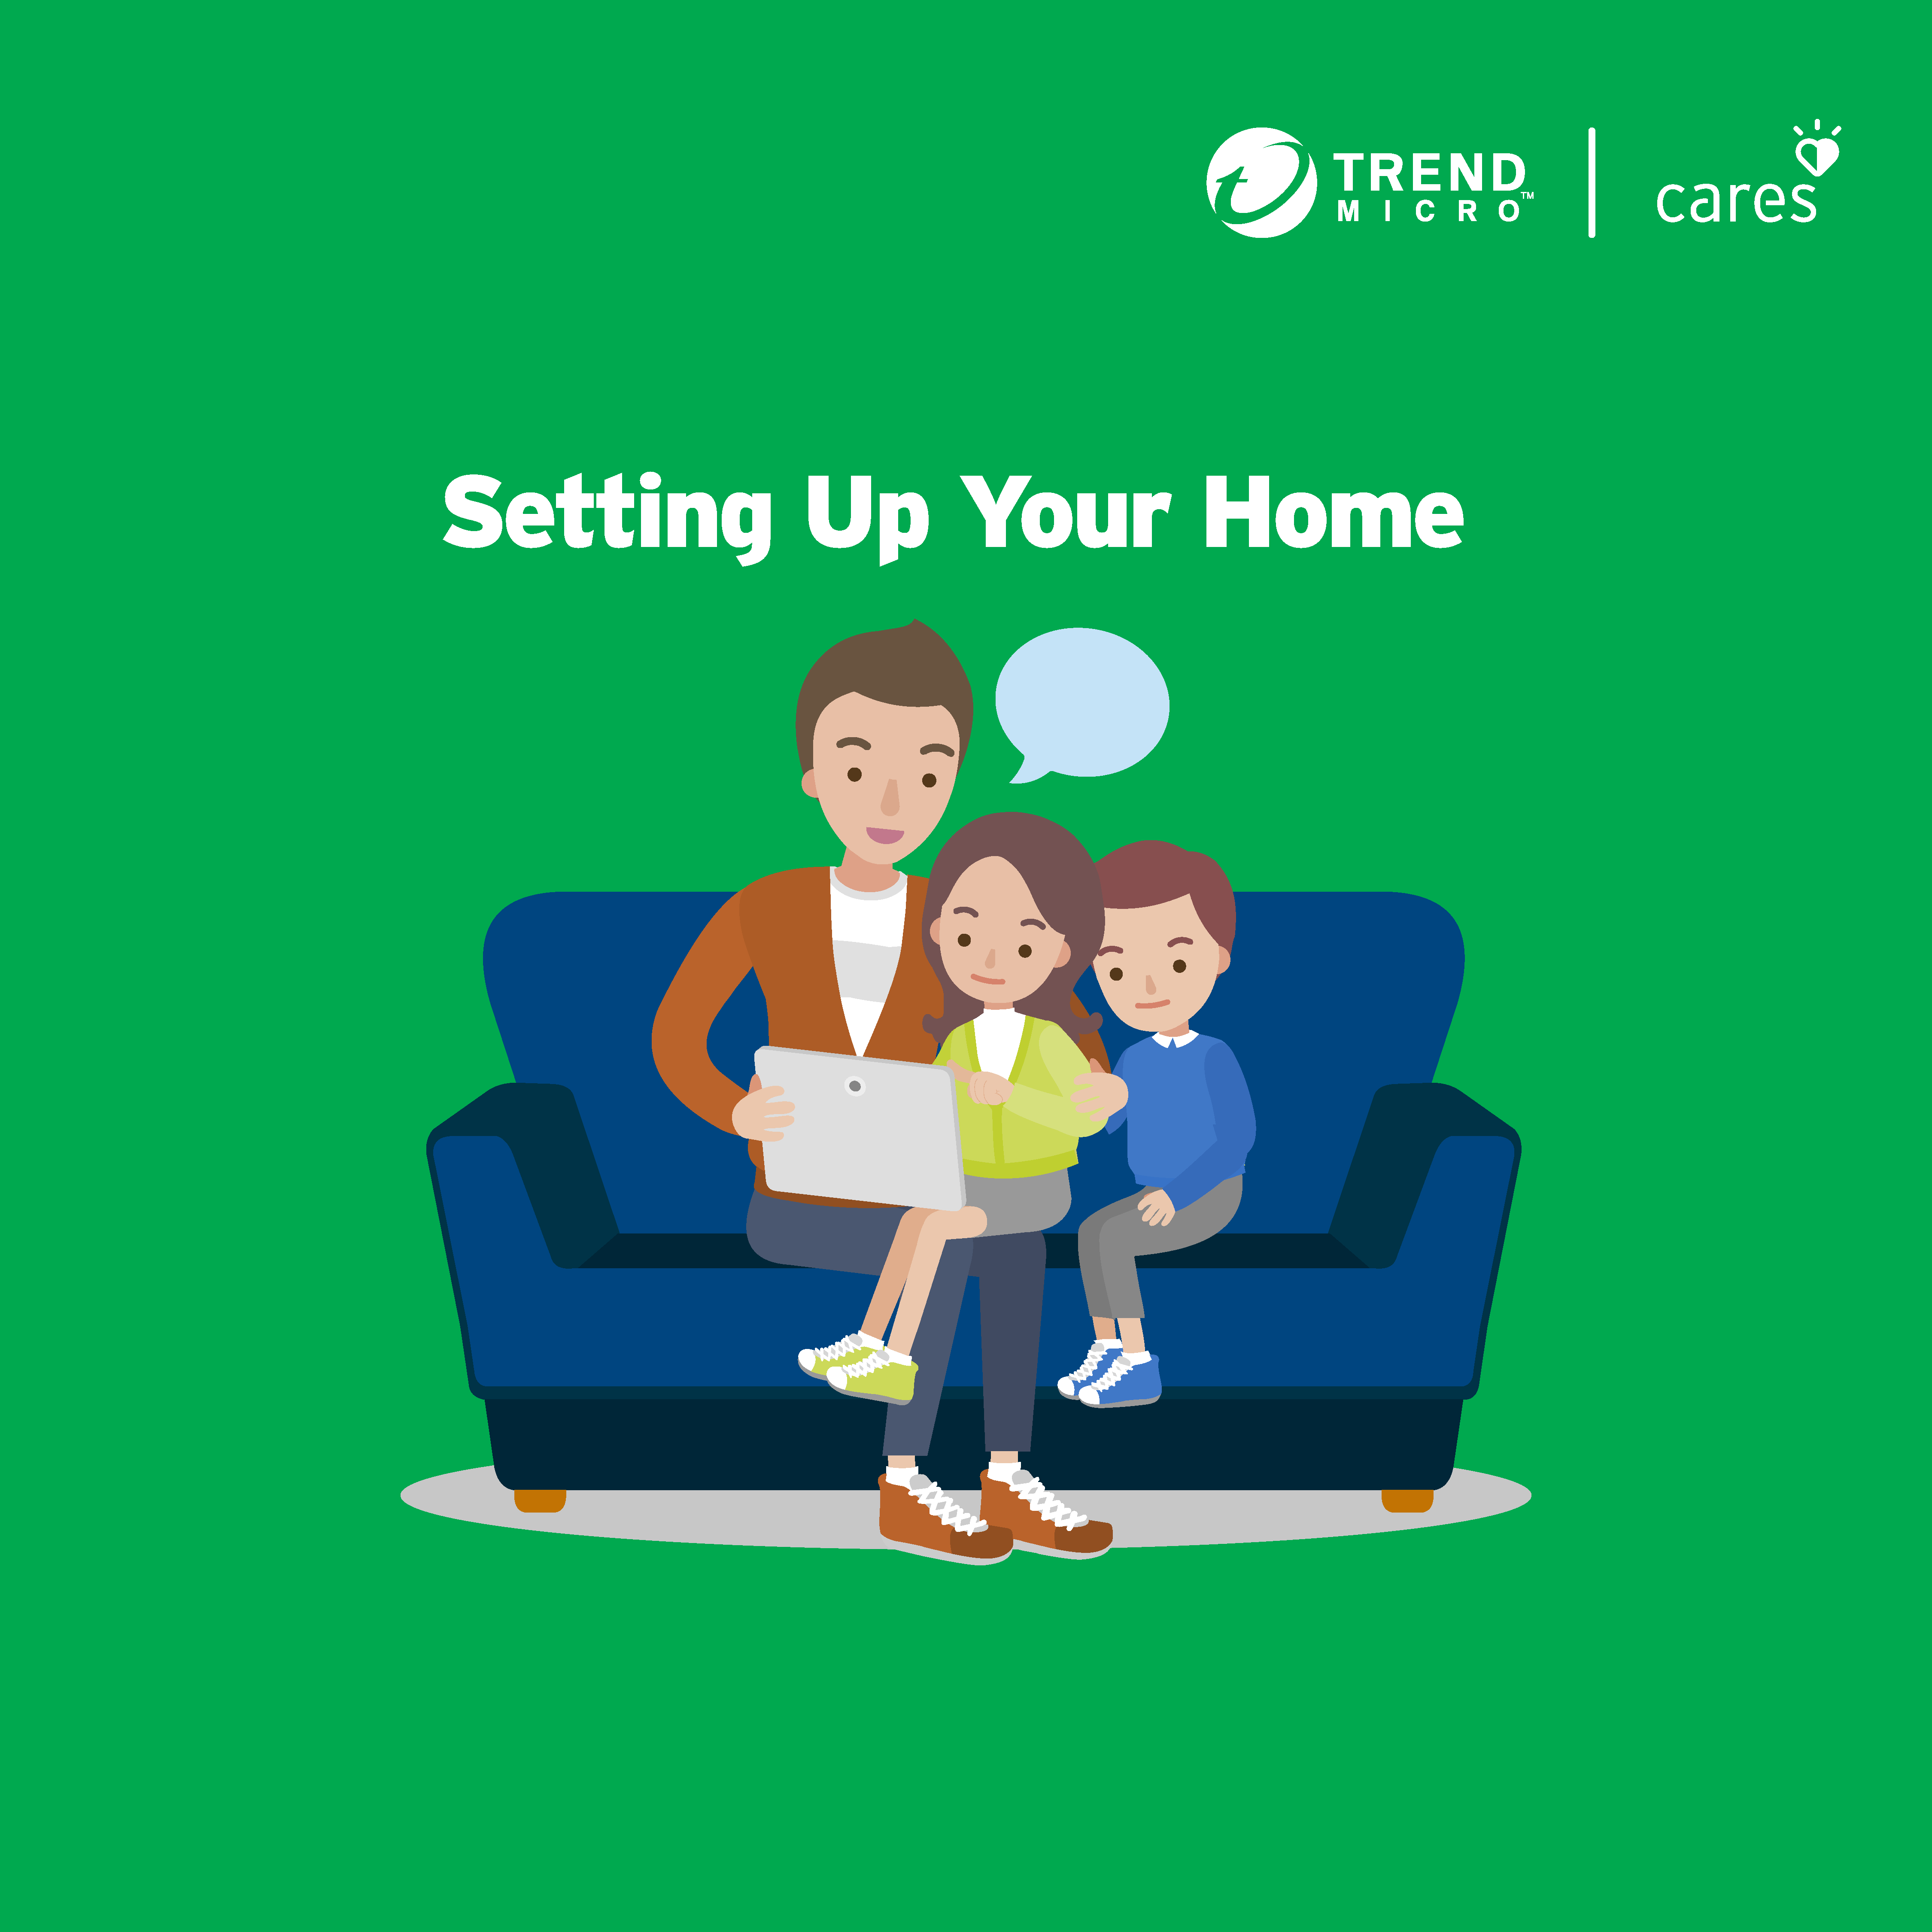 Managing Family Life Online Webinar Series - Setting Up Your Home